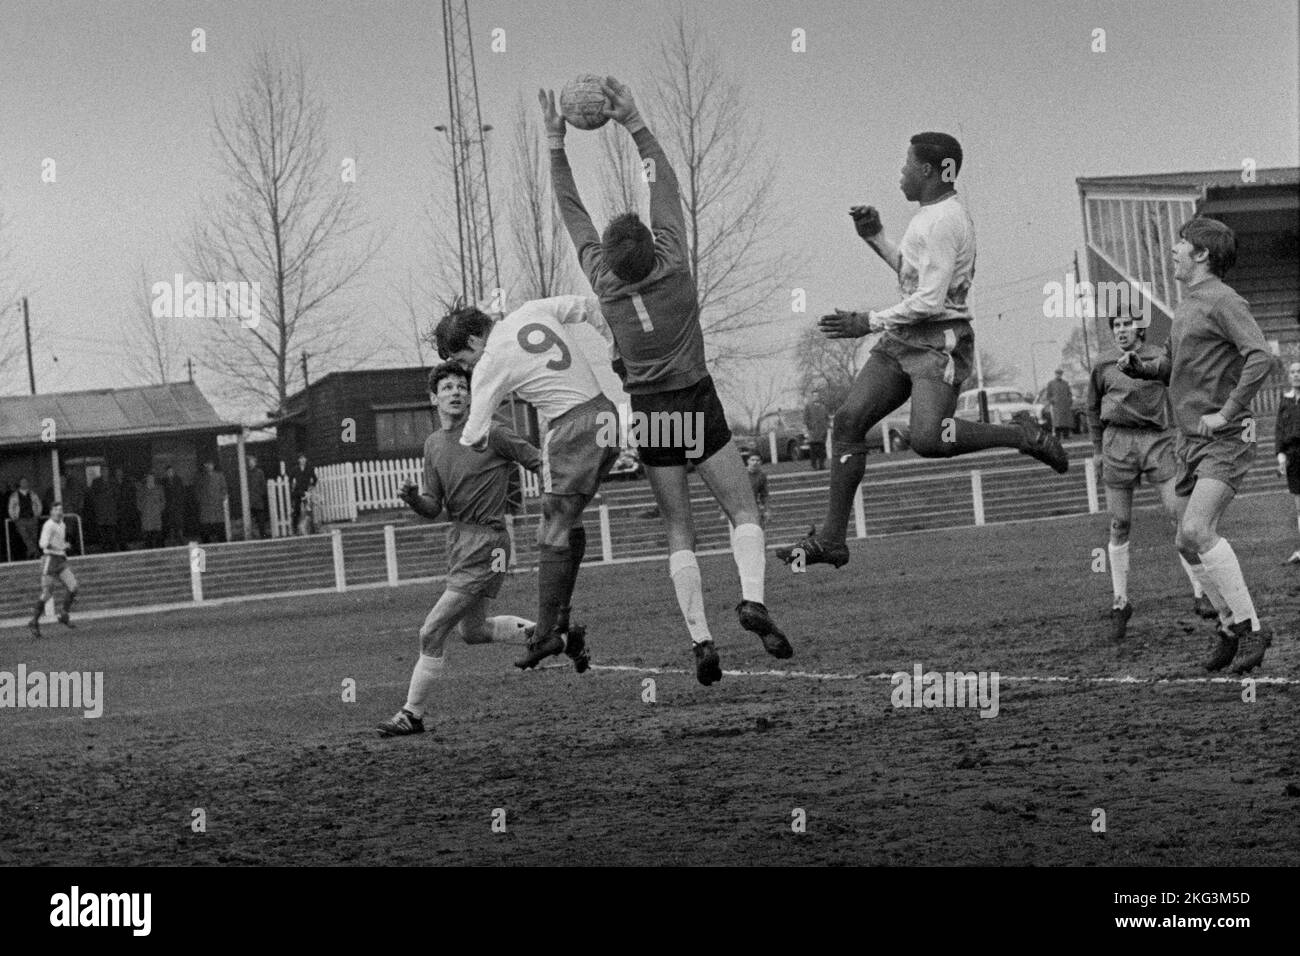 Aveley FC v Hertford Town FC 14 March 1970 played at Mill Road ground Aveley Essex. Scan made in 2022 Stock Photo